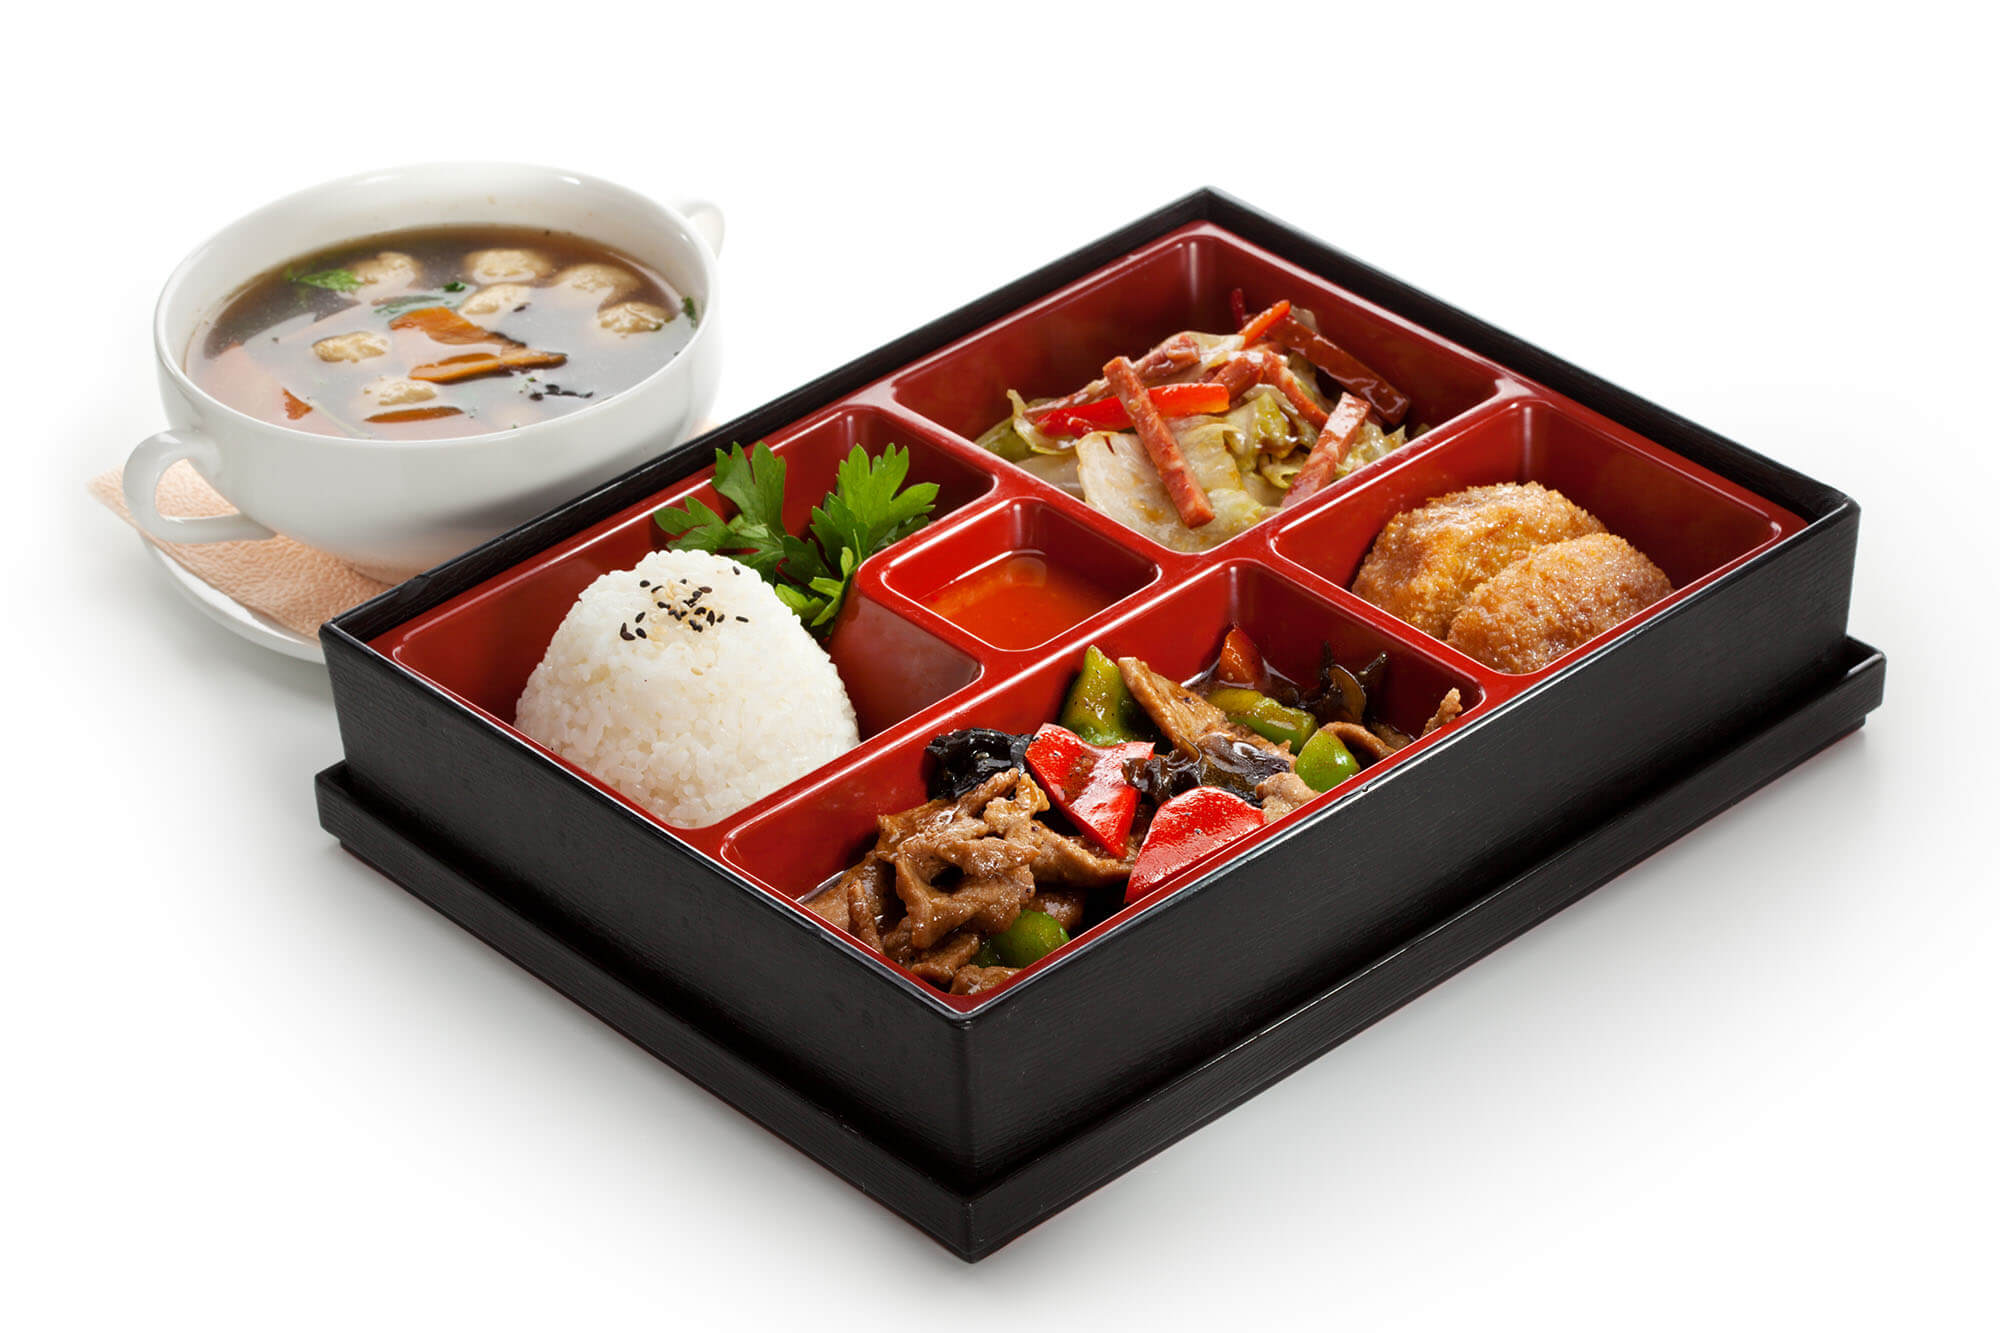 In Room Dining Bento Box Mua Le Hoi Tai Four Points By Sheraton Danang